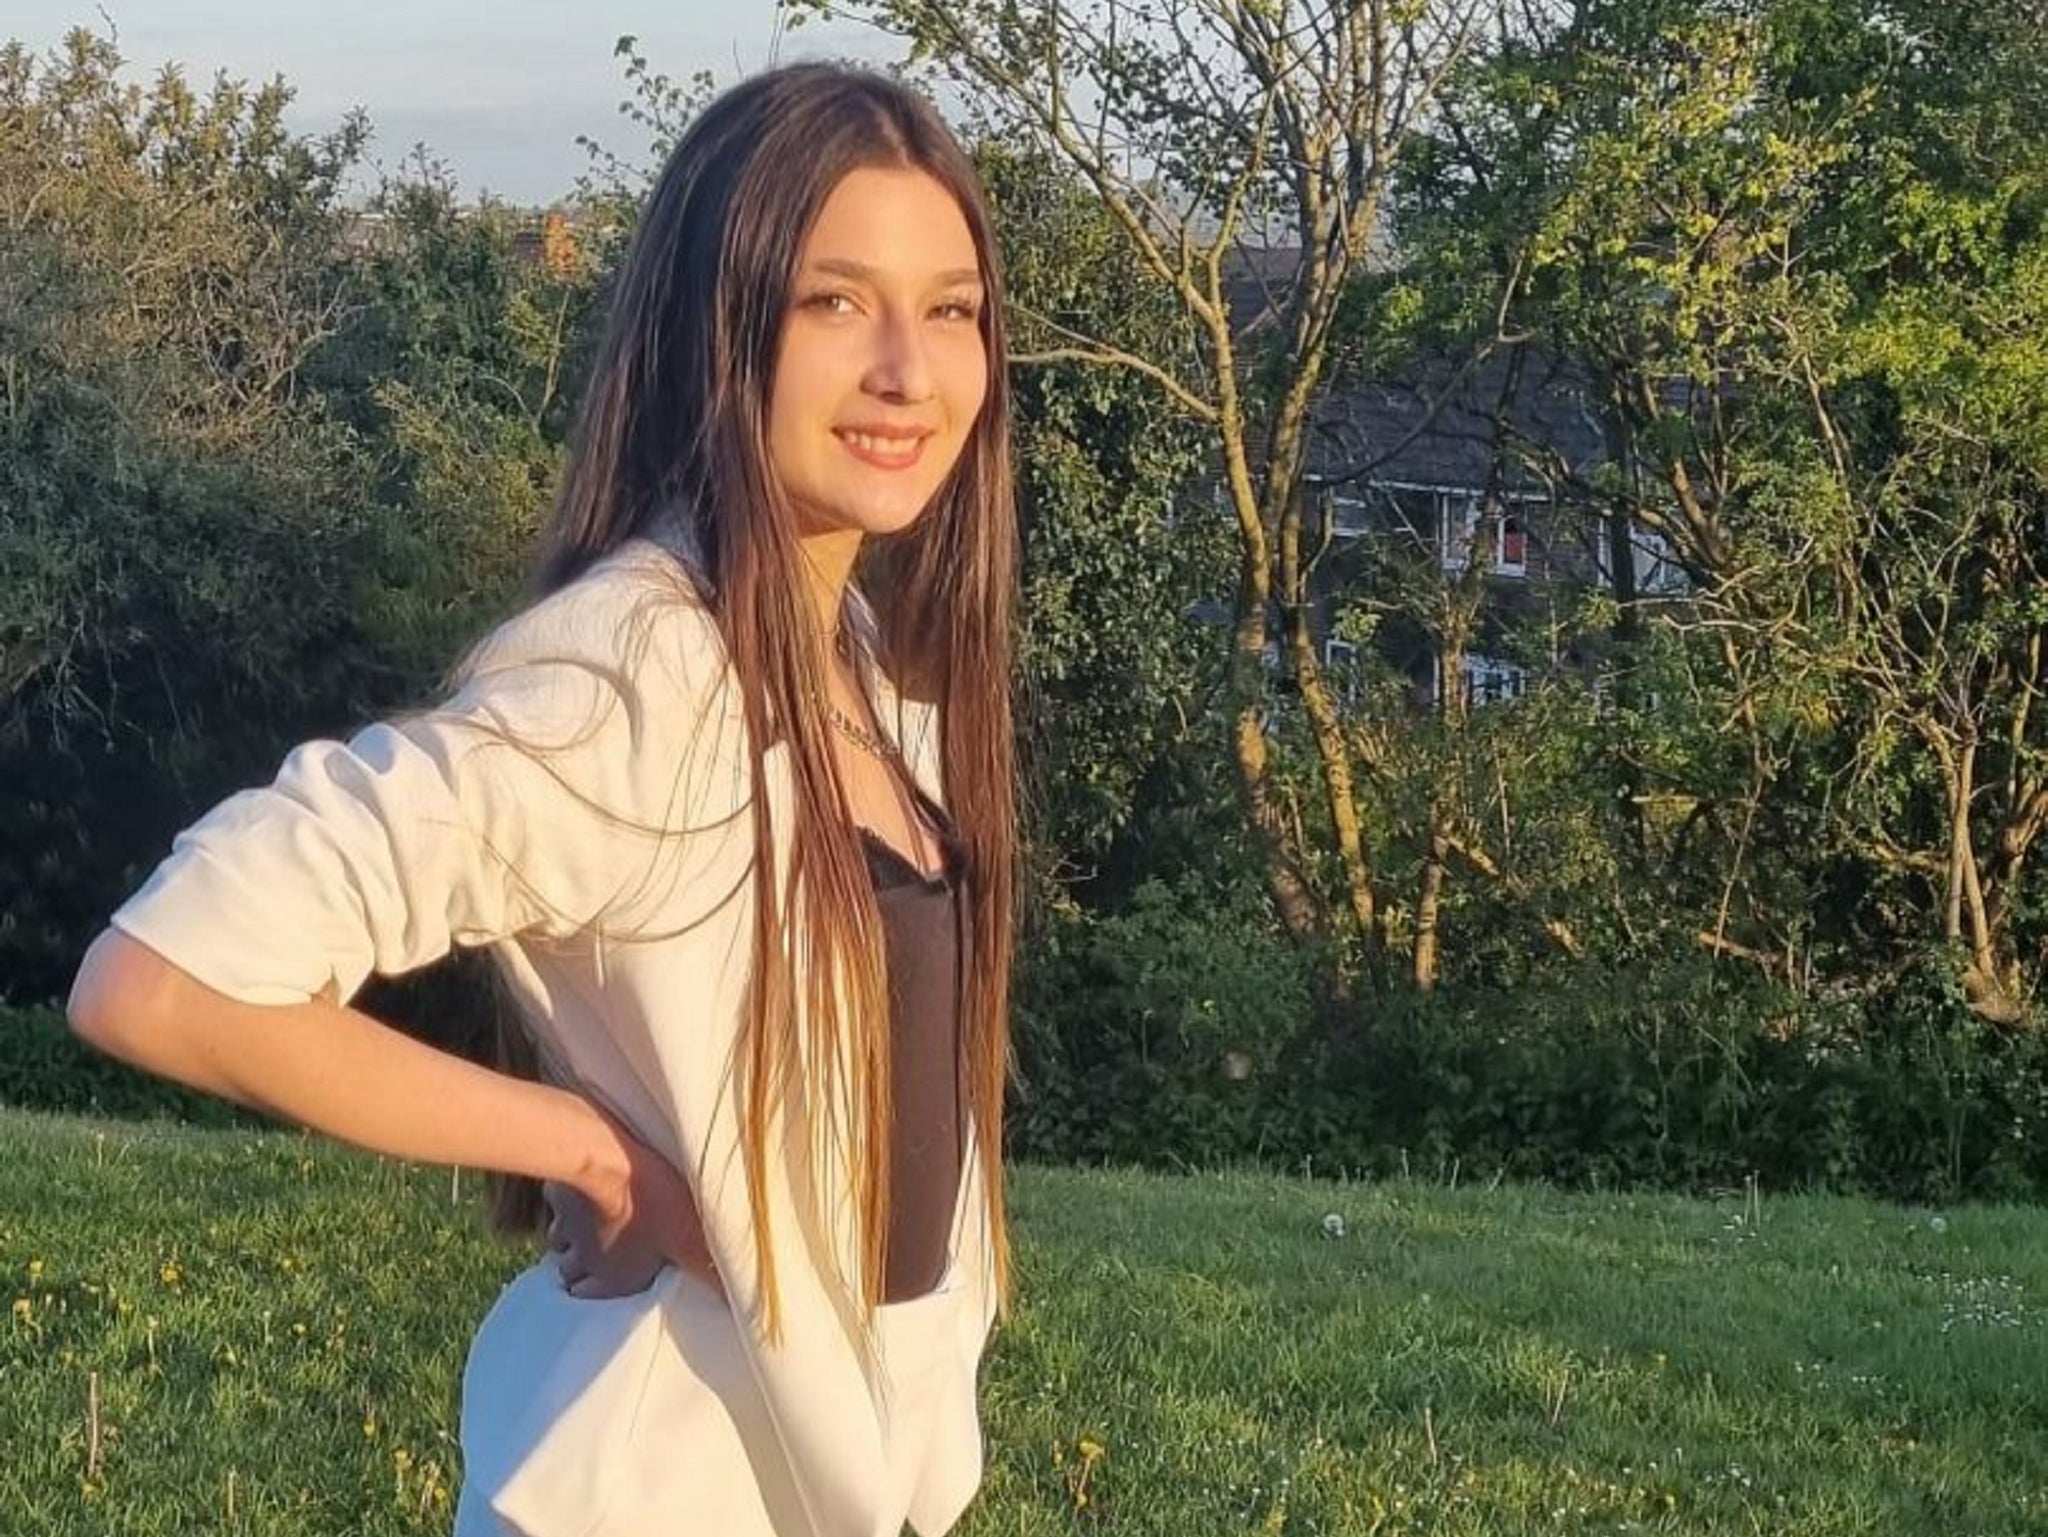 The family of Olivia Kolek, 14, have paid tribute to the teenager who died after being hit by a car driven by a suspected drug-driver